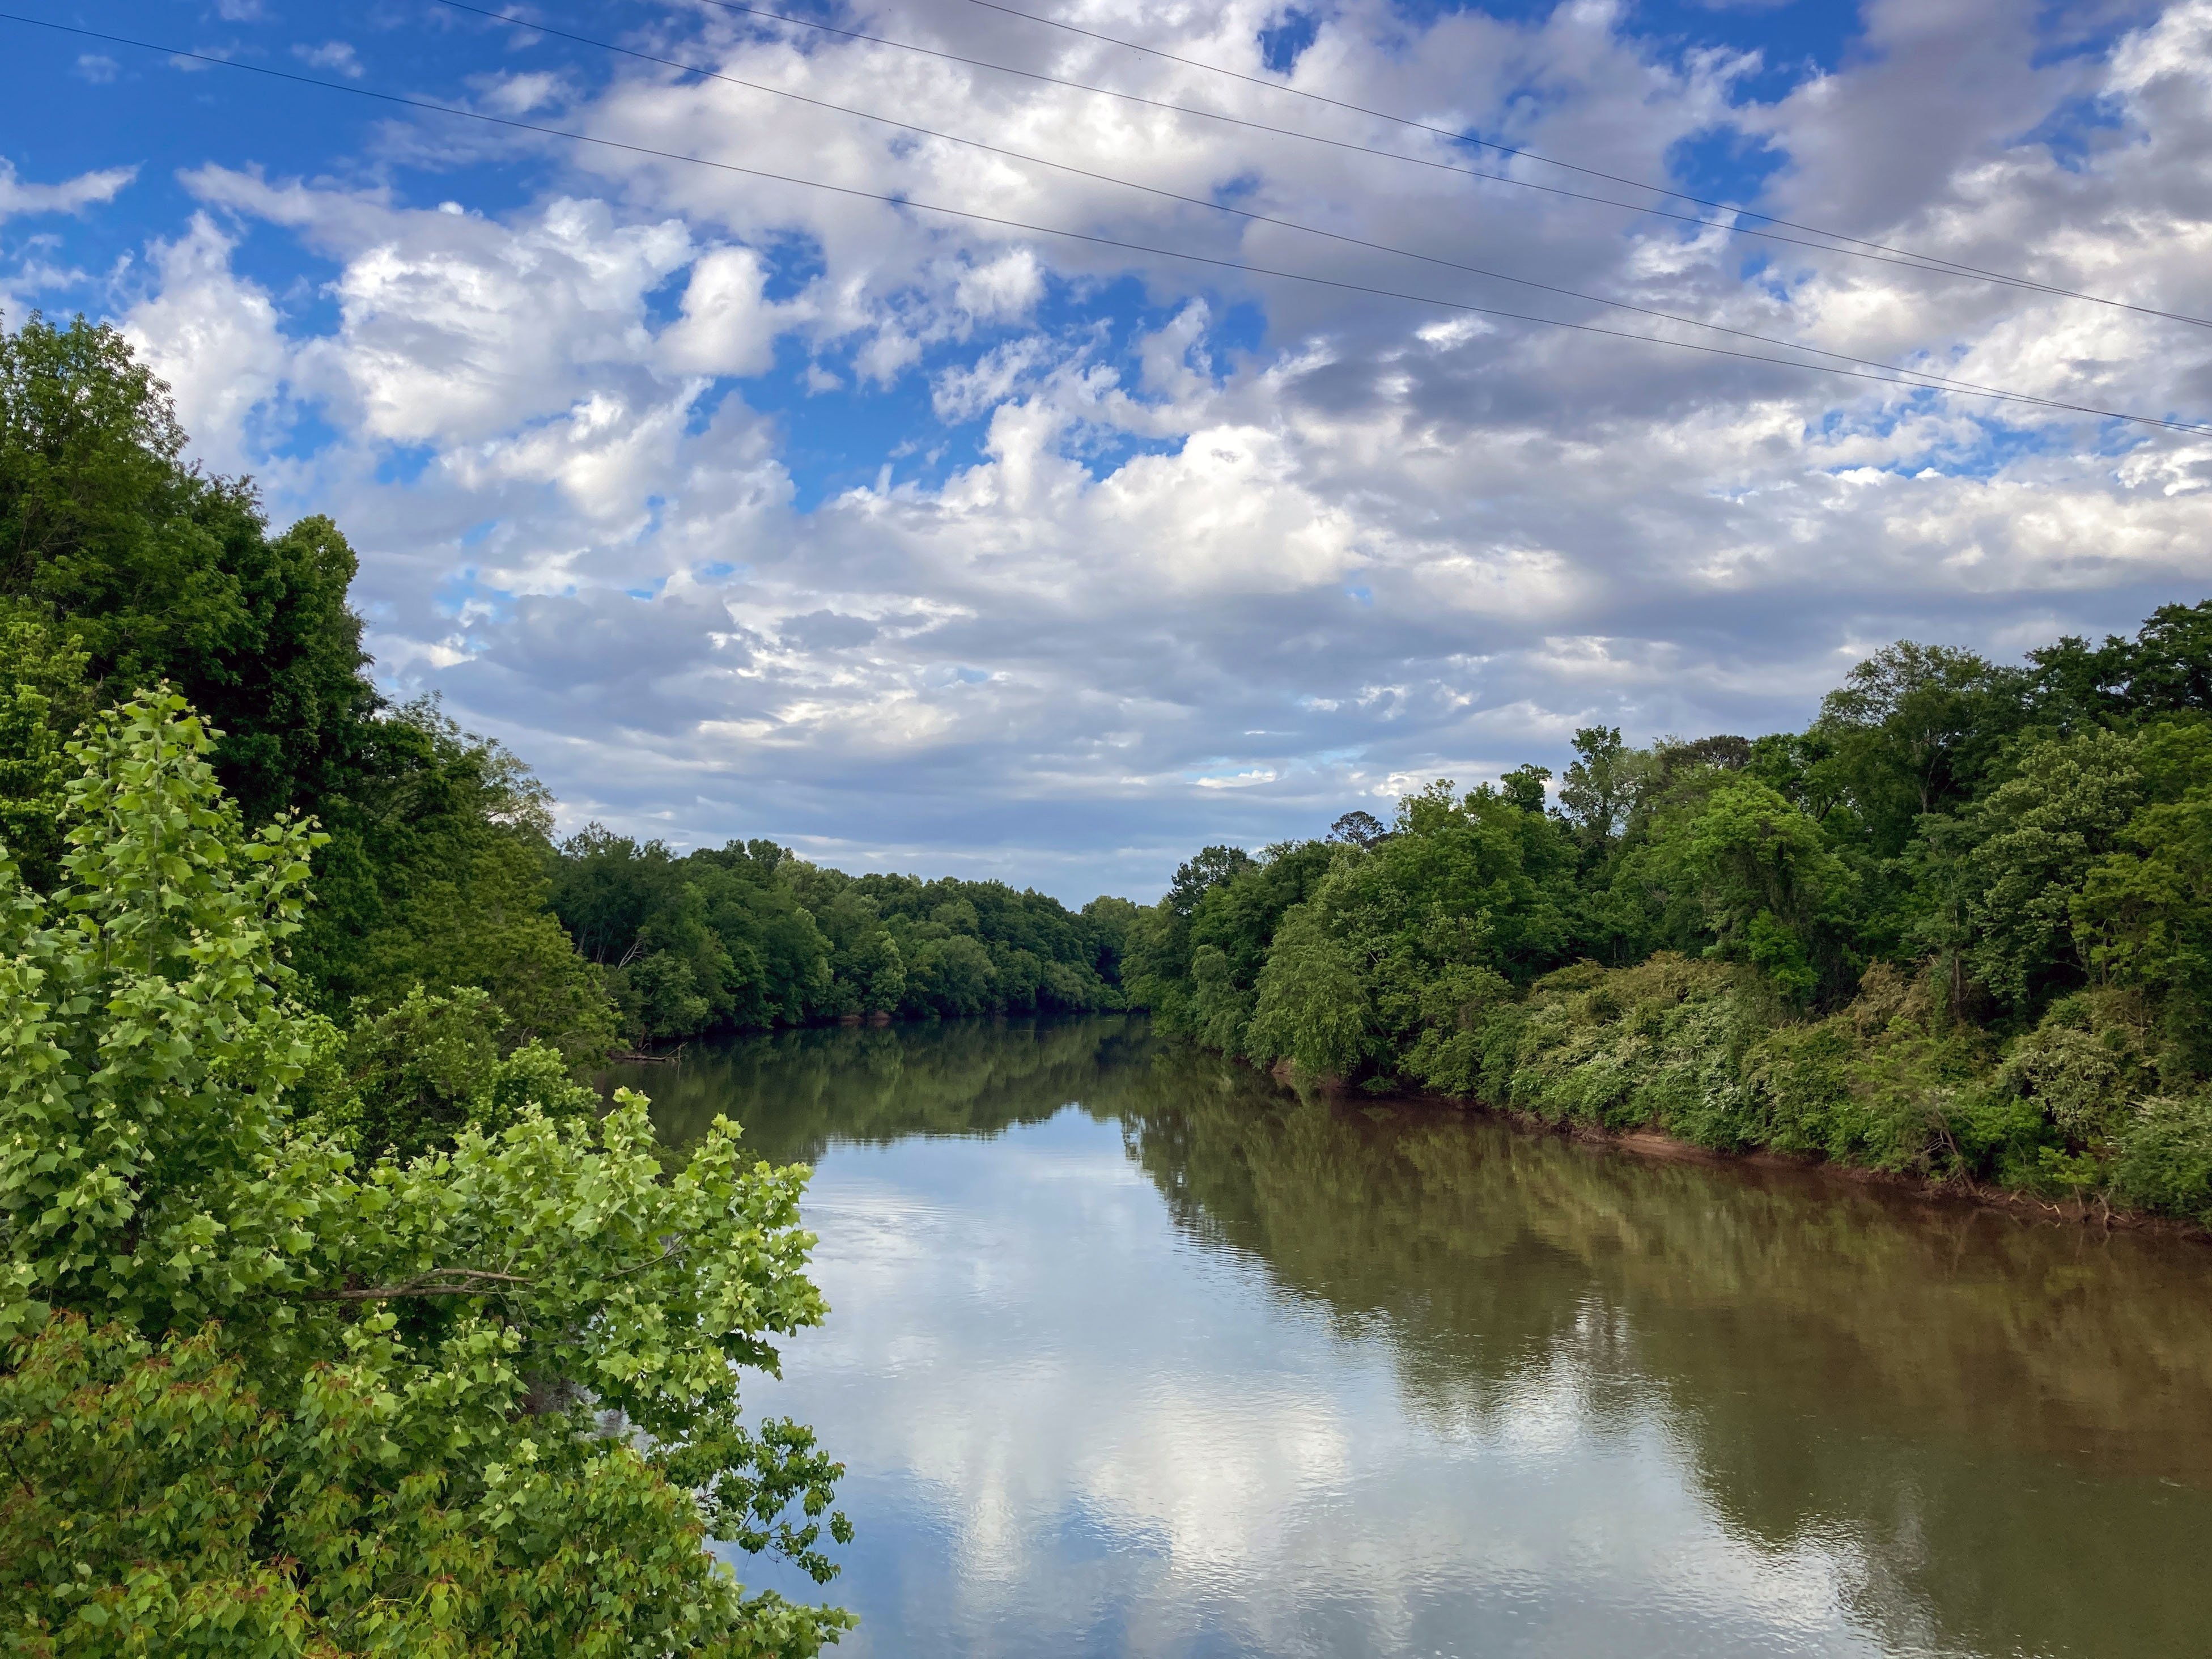 Daily Snap #5:  Amerson Park - View of the Ocmulgee River from the Porter Pavilion overlook at Amerson Park.